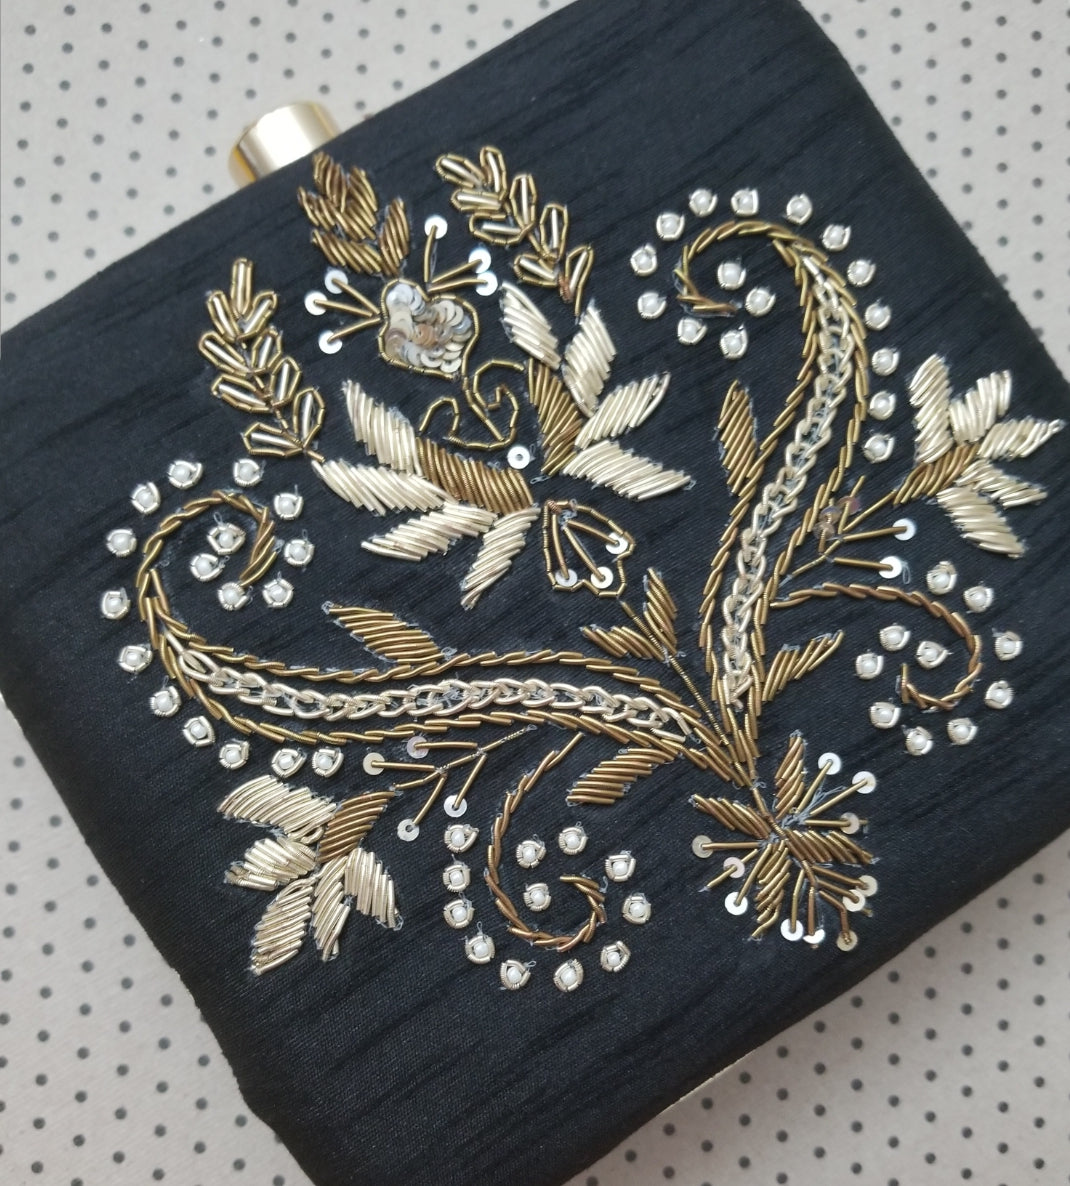 Black Embroidered Clutch - Zoha Los Angeles